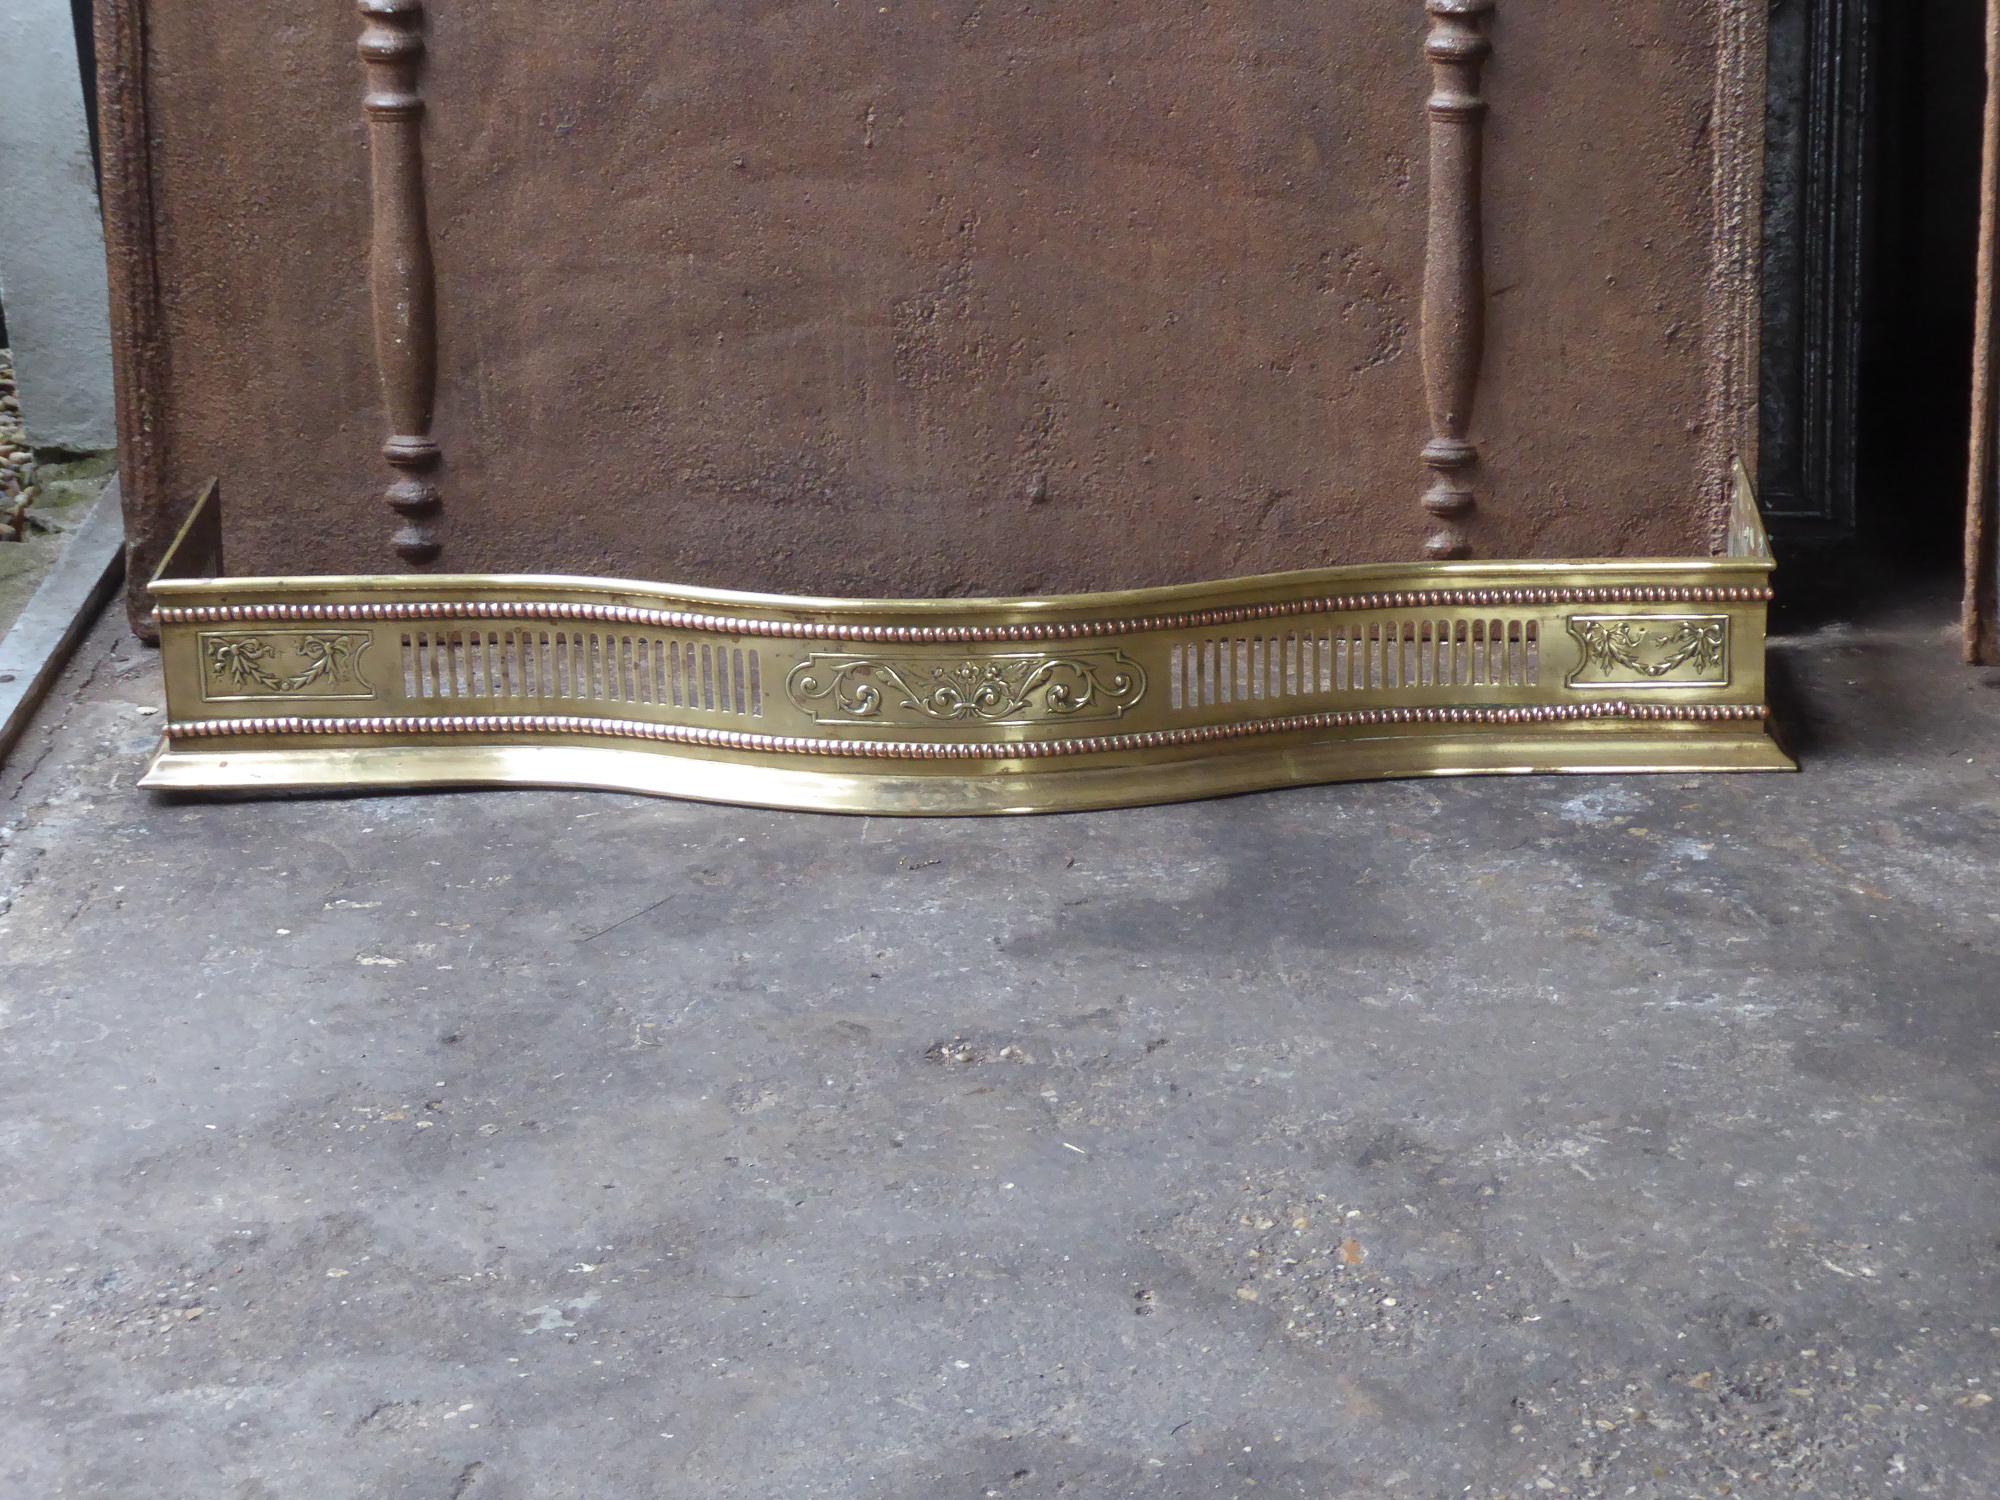 Beautiful 19th century English Victorian fireplace fender. The fender is made of polished brass and polished copper. The fender is in a good condition and is fully functional.